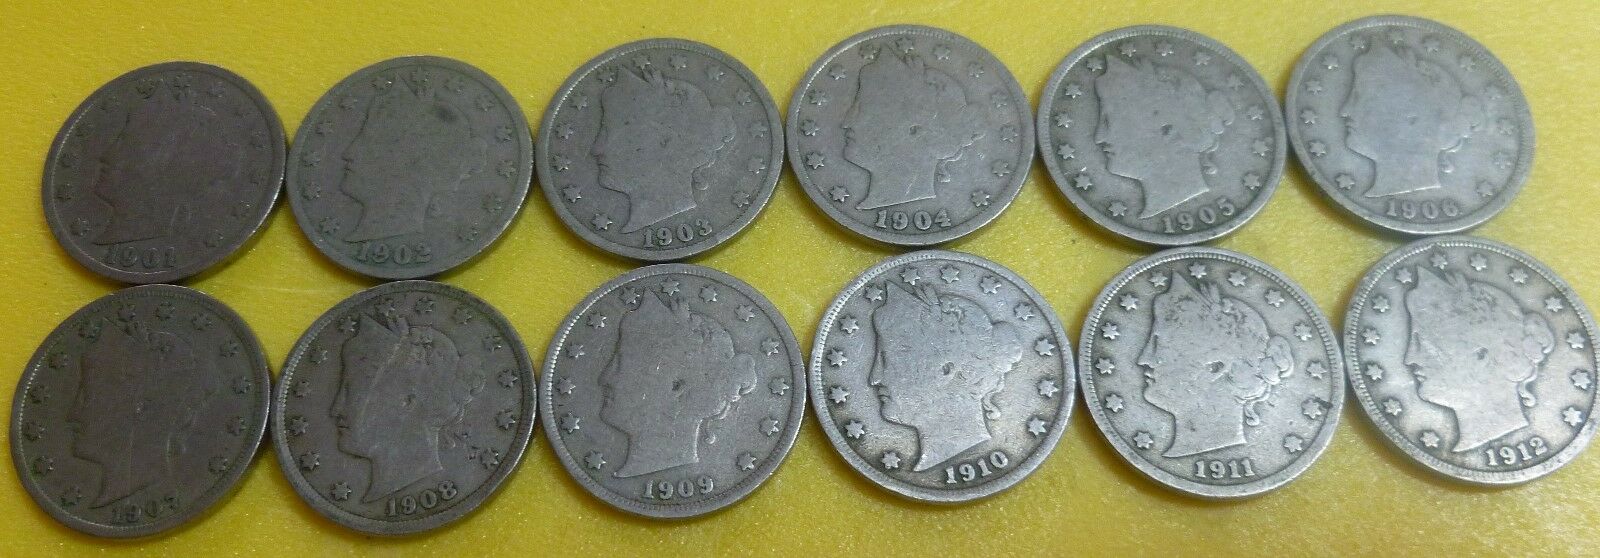 12 Different  Liberty Head Nickels Starter Collection   * Lot-lhnsc12